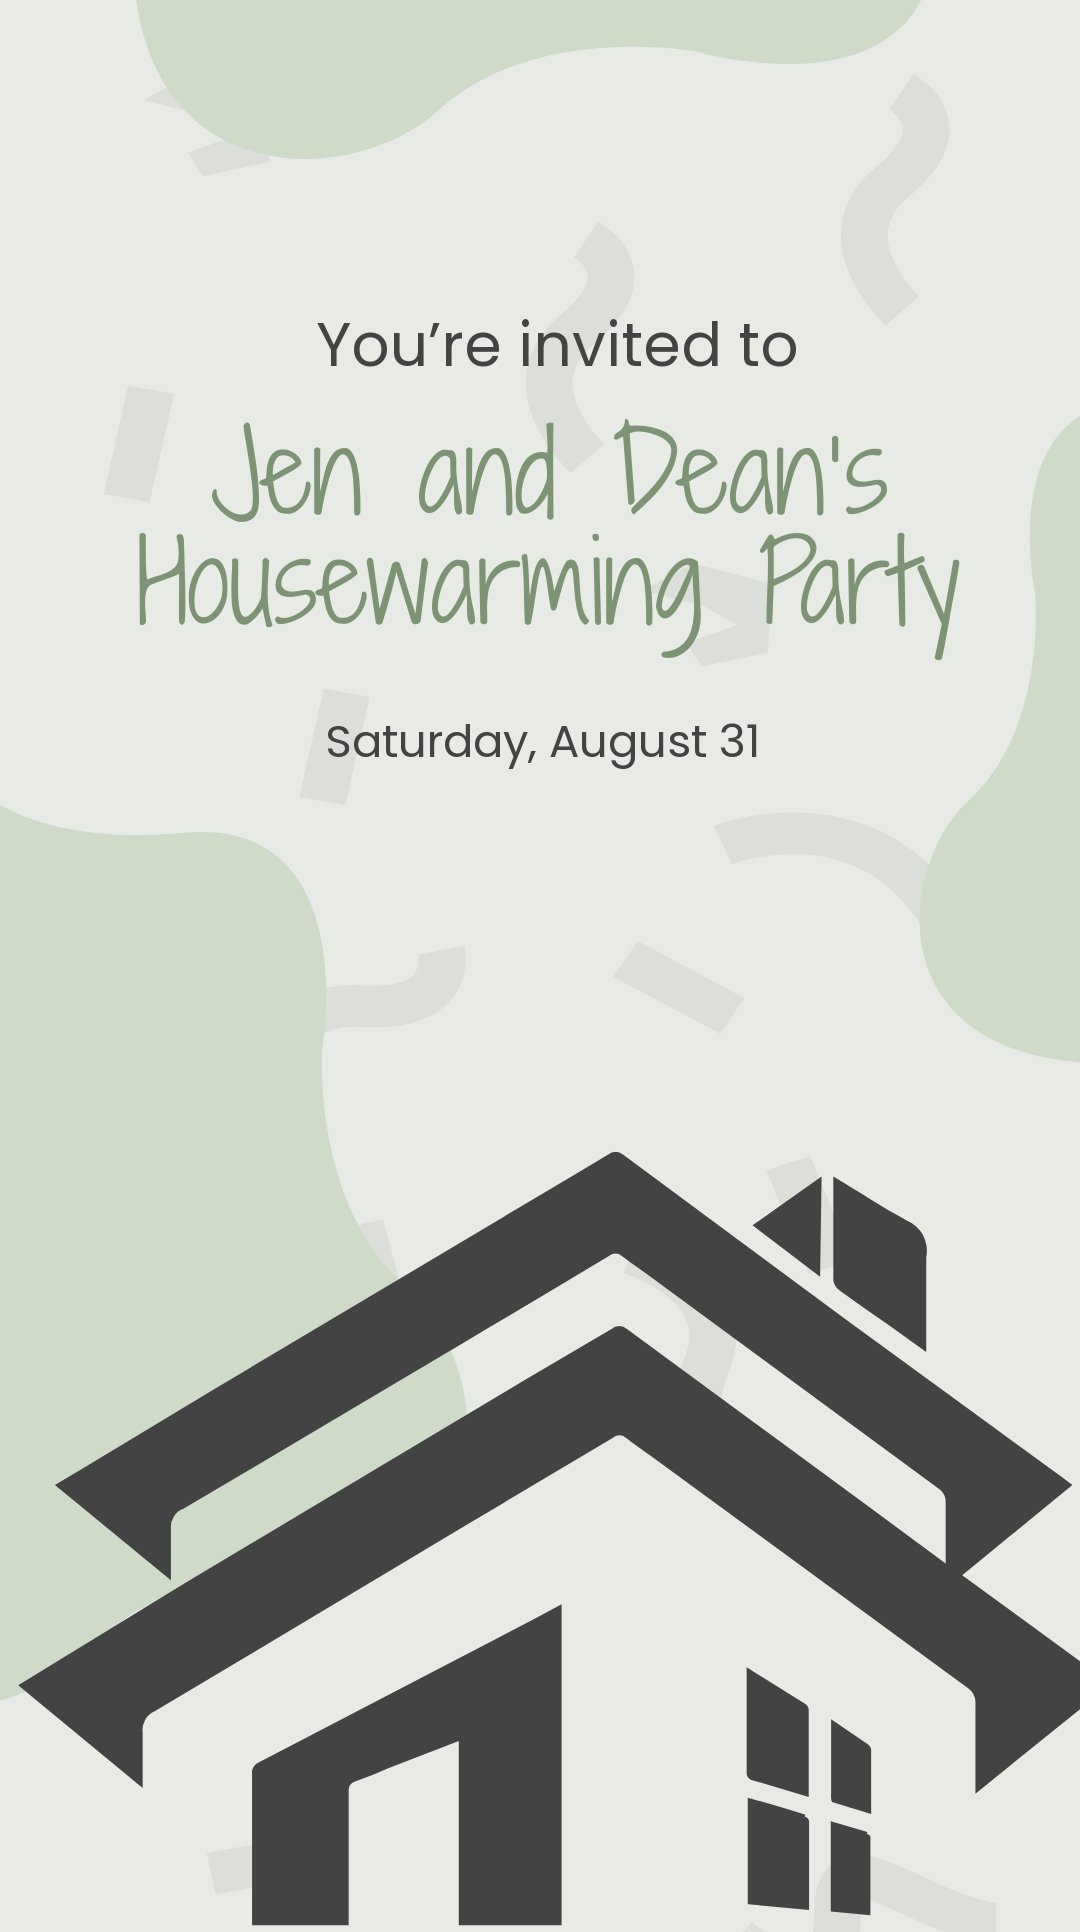 Housewarming party pictures free